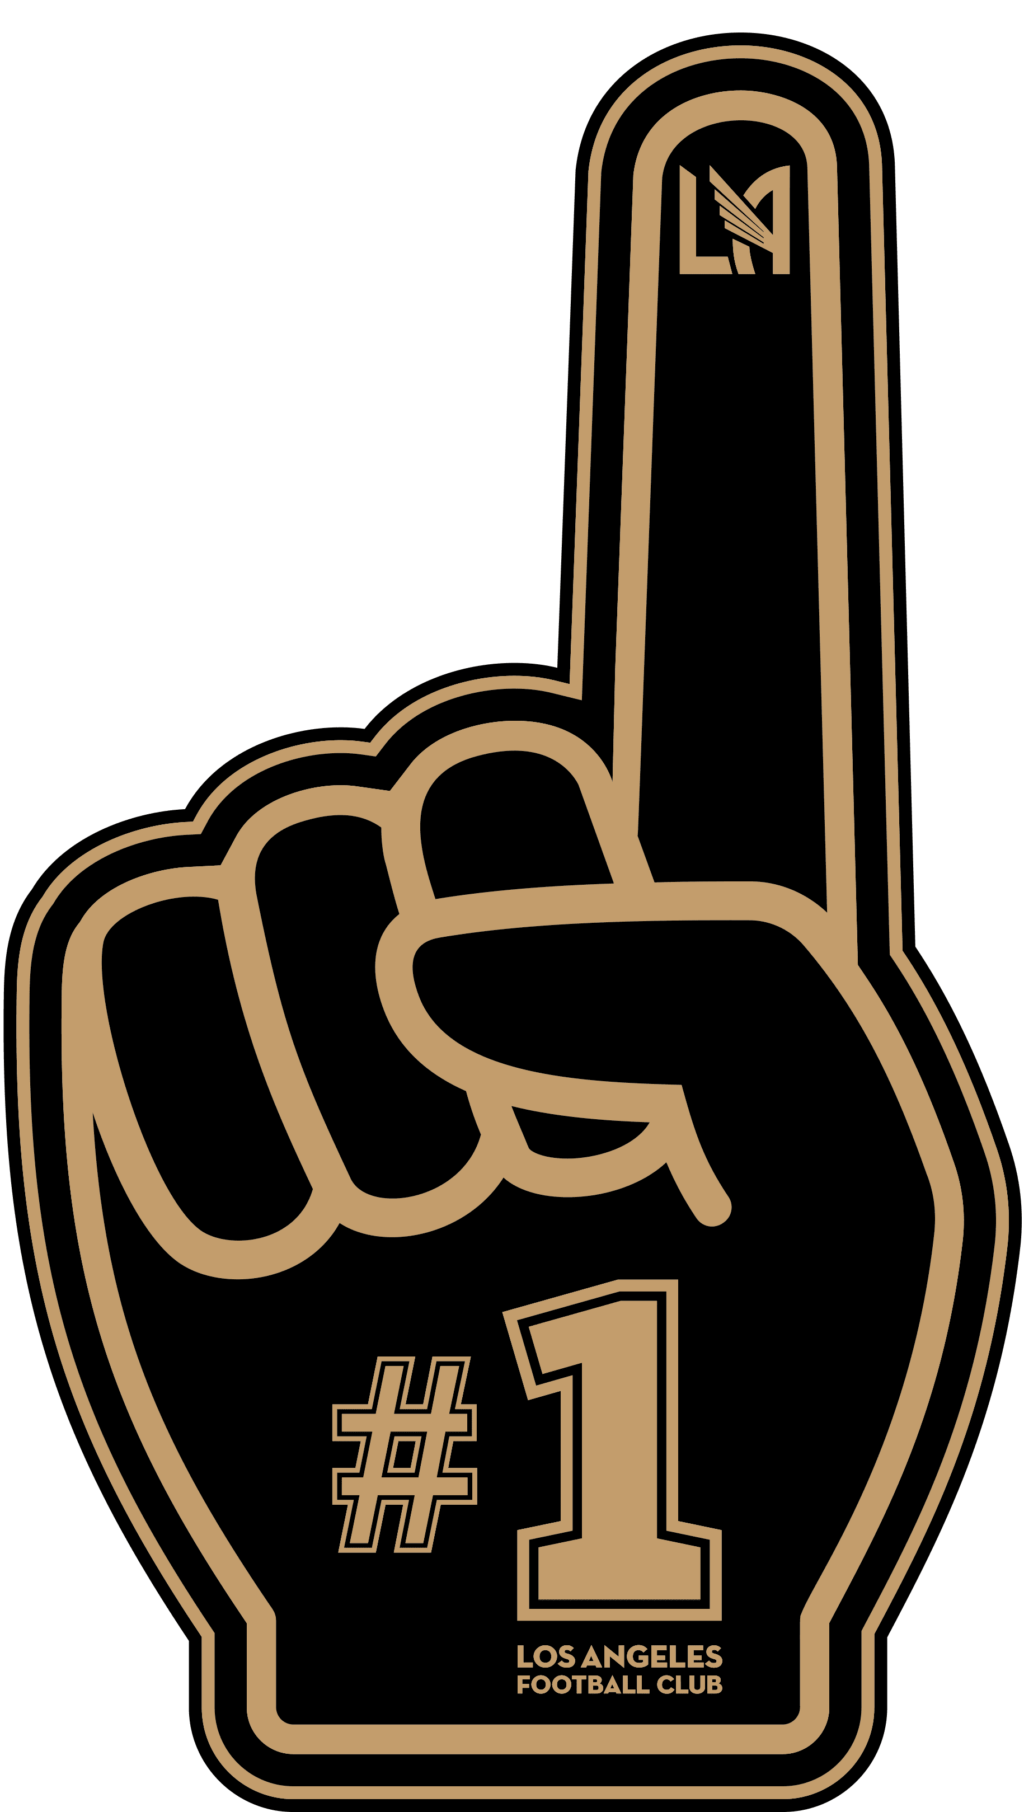 LAFC 07 1 MLS LAFC SVG, SVG Files For Silhouette, LAFC Files For Cricut, Los Angeles Football Club SVG, DXF, EPS, PNG Instant Download. LAFC SVG, SVG Files For Silhouette, Los Angeles Football Club Files For Cricut, LAFC SVG, DXF, EPS, PNG Instant Download.